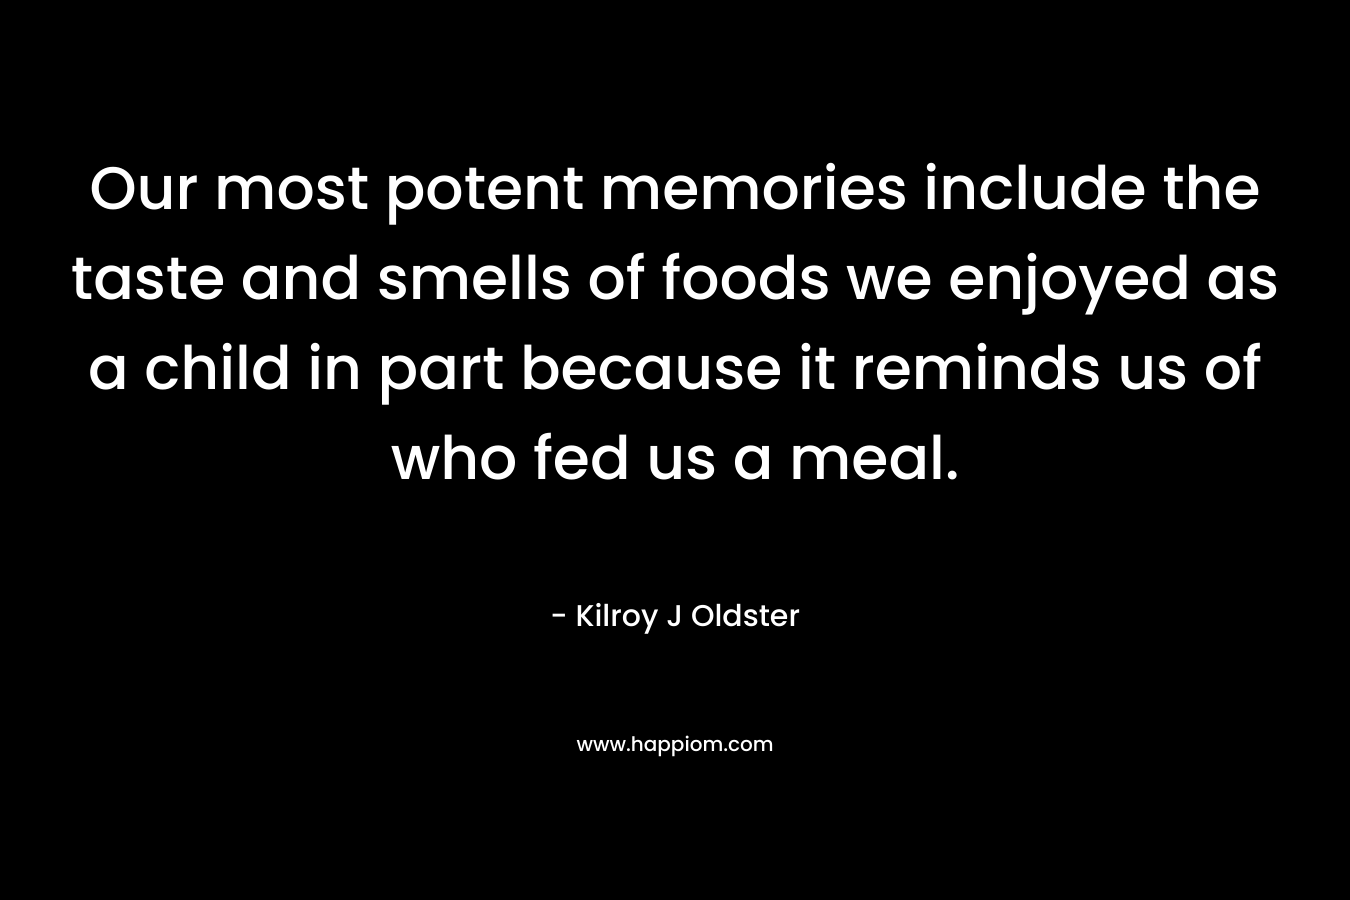 Our most potent memories include the taste and smells of foods we enjoyed as a child in part because it reminds us of who fed us a meal. – Kilroy J Oldster